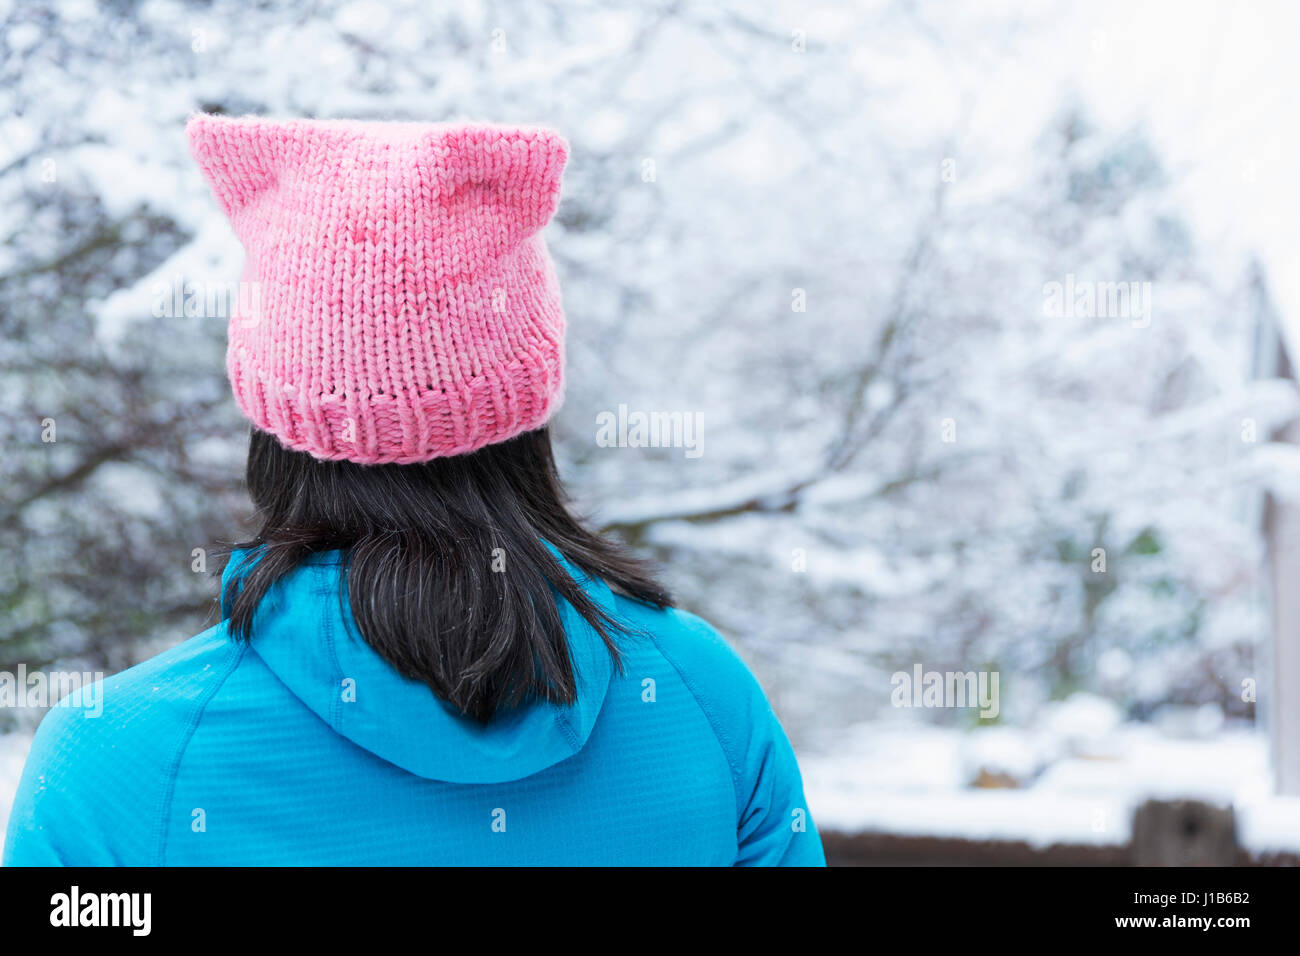 Japanese woman wearing pink hat with ears Stock Photo